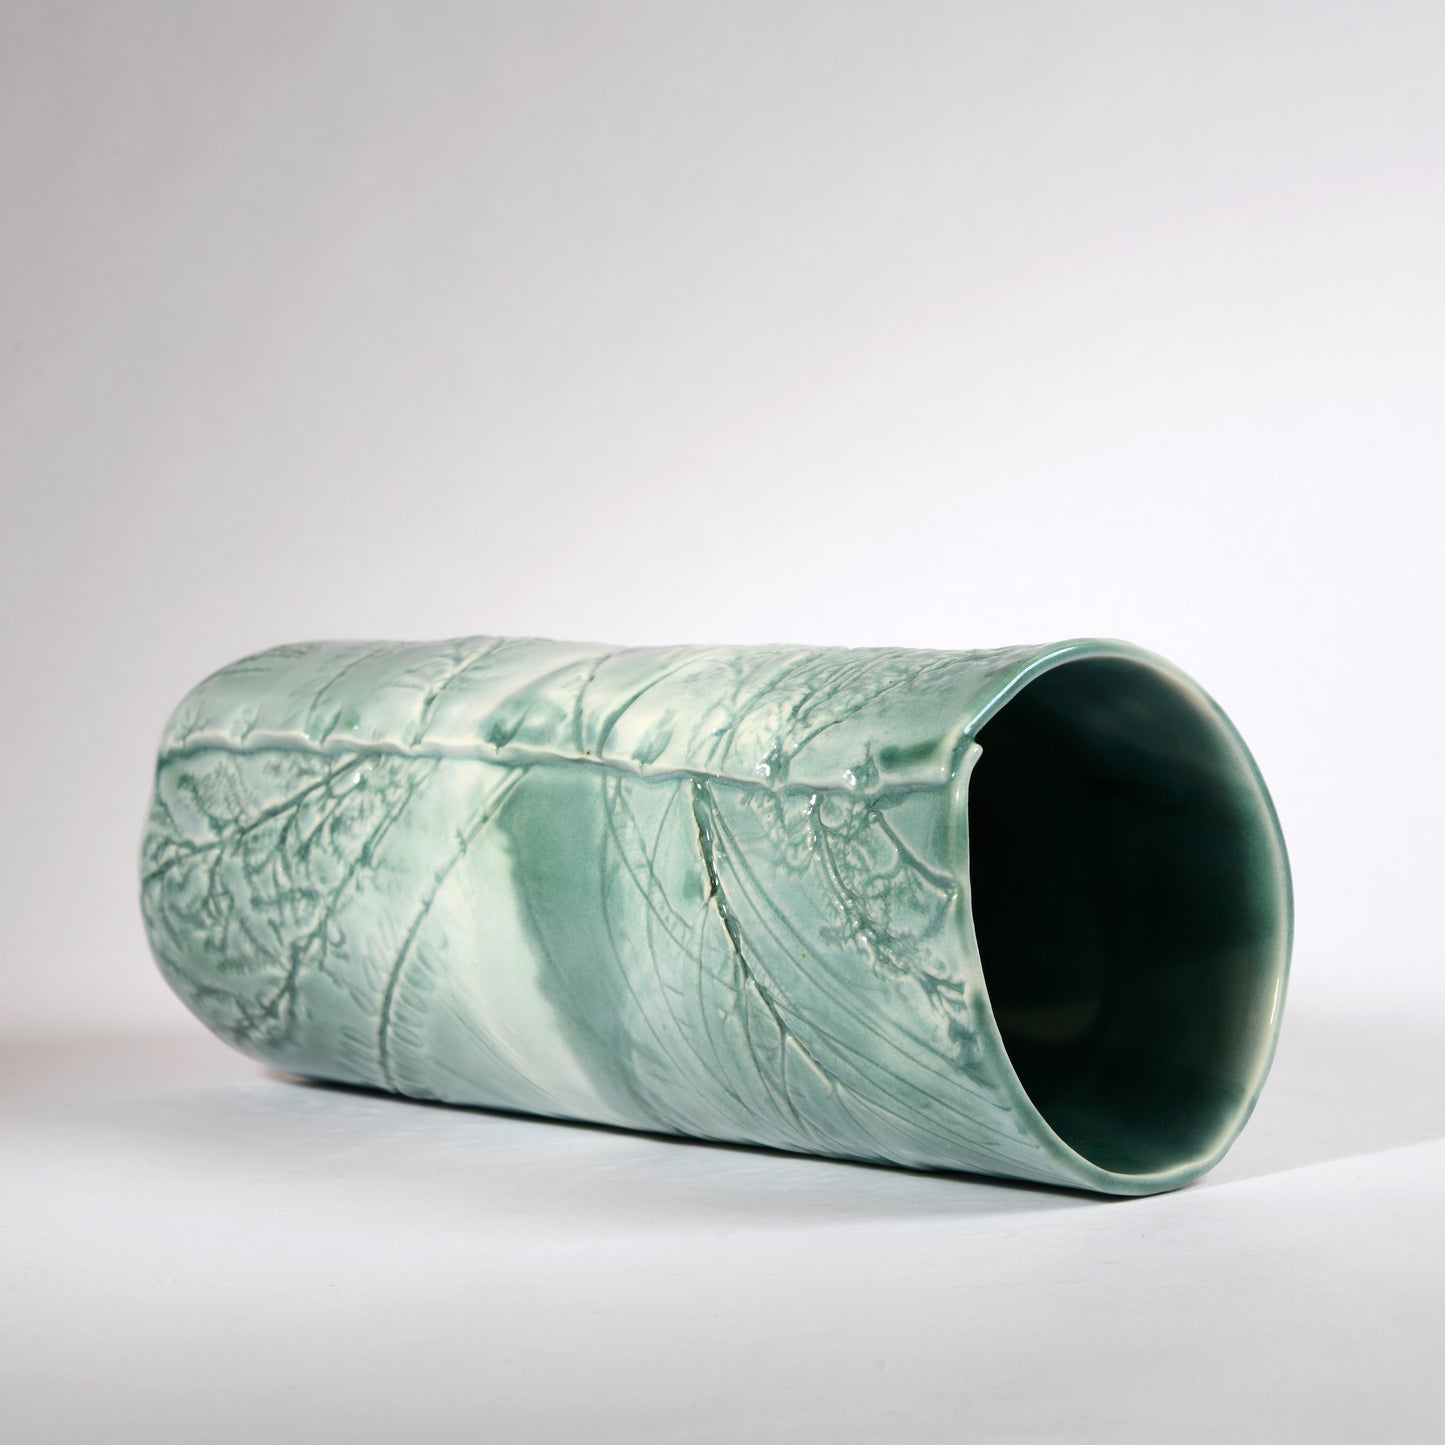 A very slightly leaning vase with an organic "windswept" design in a beautiful aqua glaze